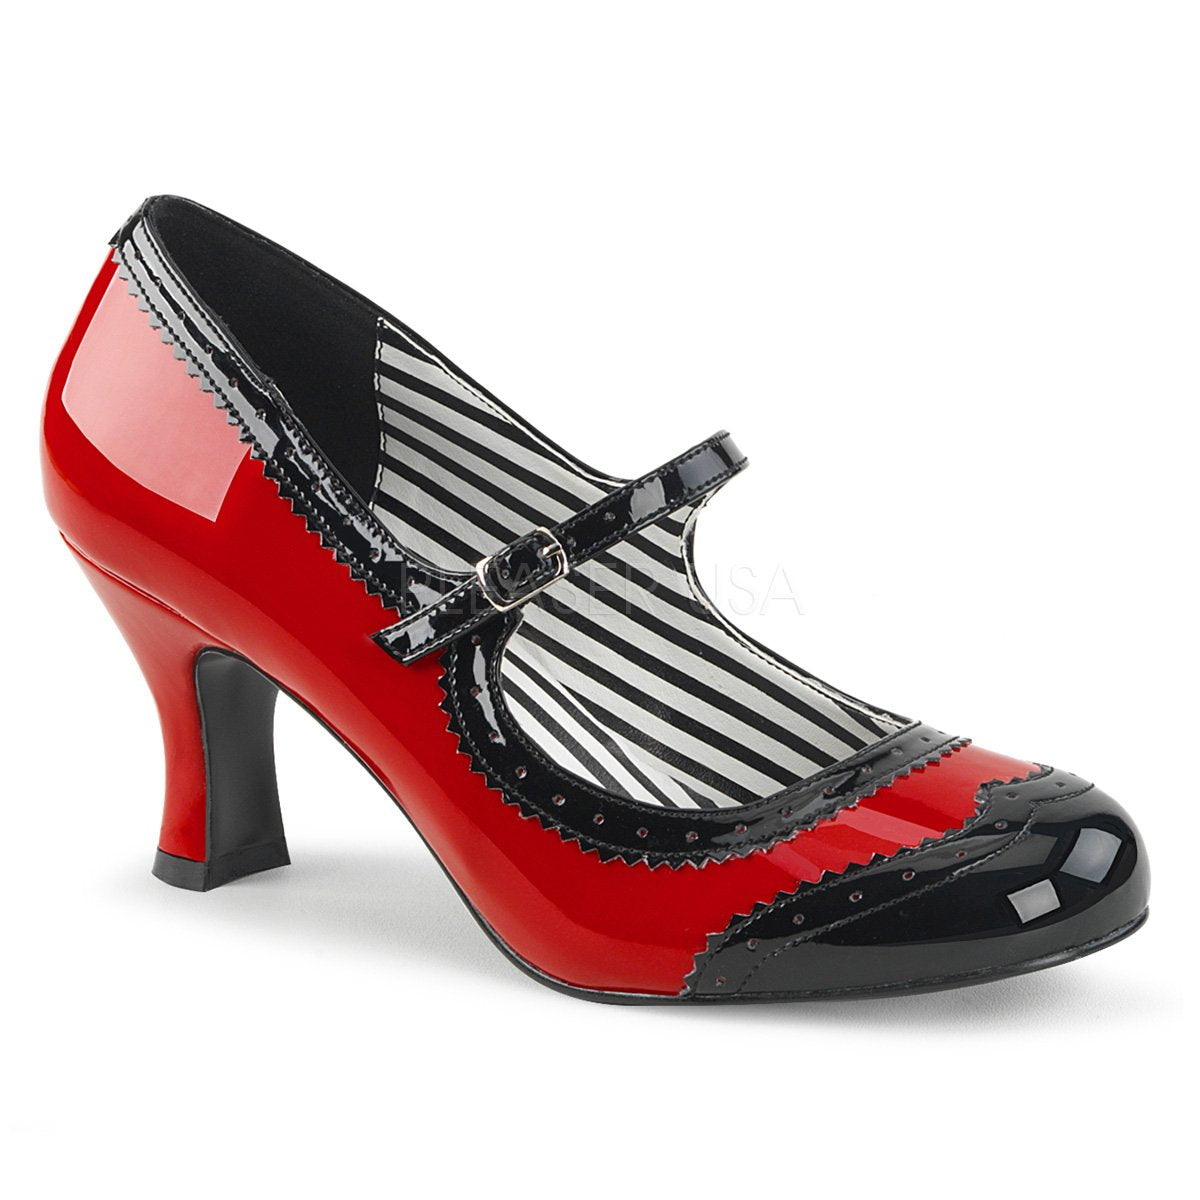 Black Red Bottom Kitten Heel Pumps, Hand Crystaled 3 Inch Heel Size US 6-11  Vegan Patent Leather Ships From US 